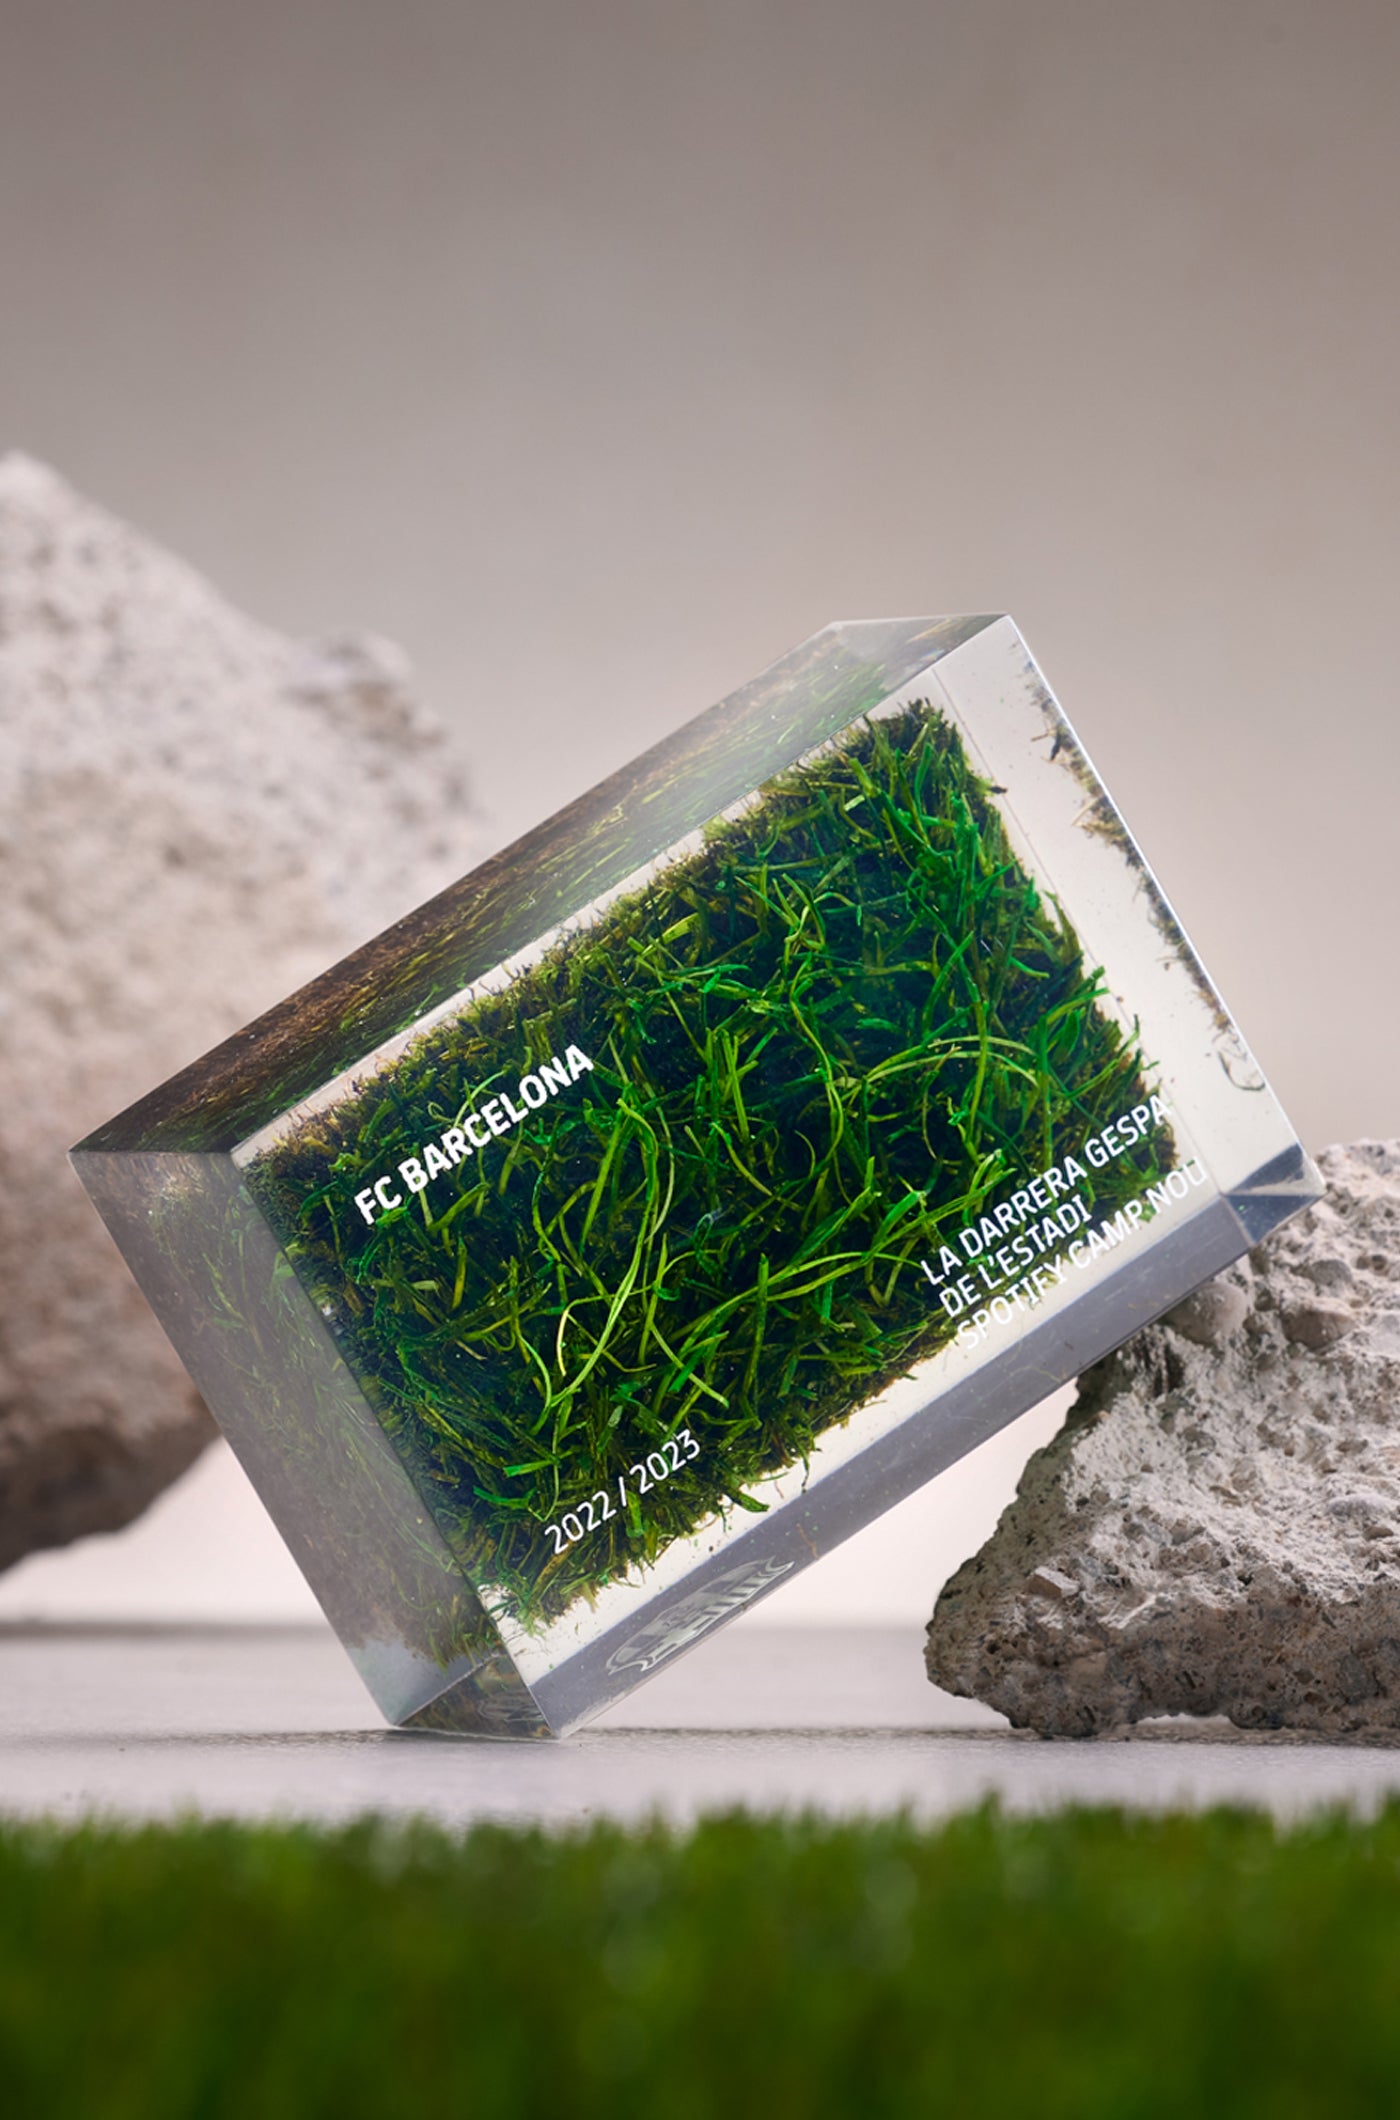 Methacrylate with grass from the last pitch at Spotify Camp Nou